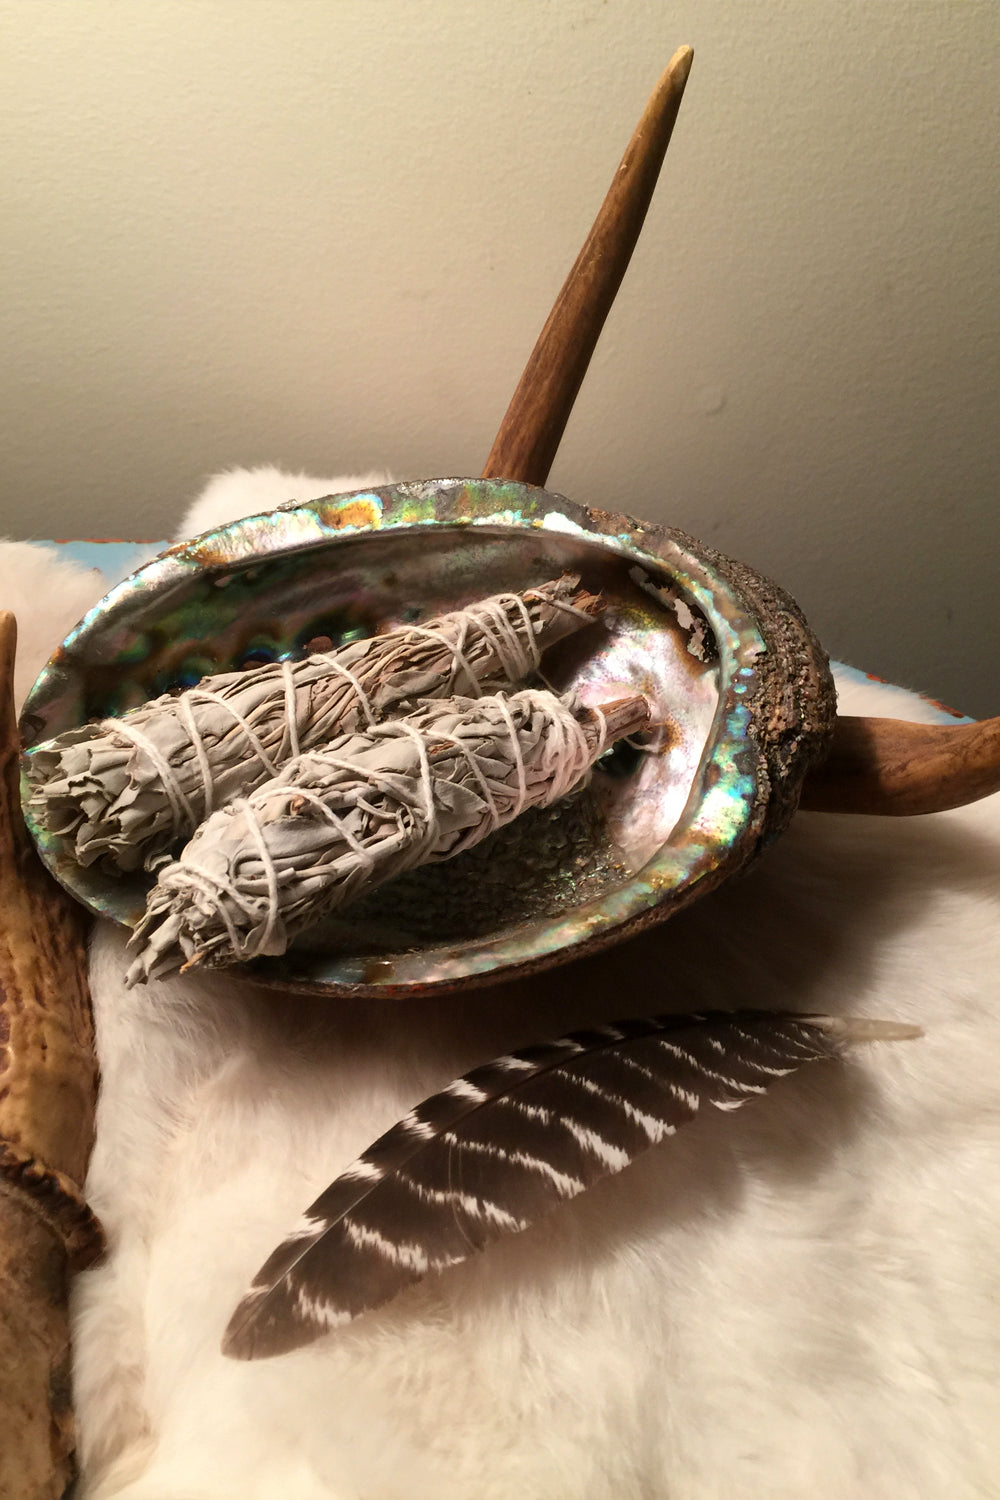 abalone smudging shell- Lizzy Lane Farm Apothecary